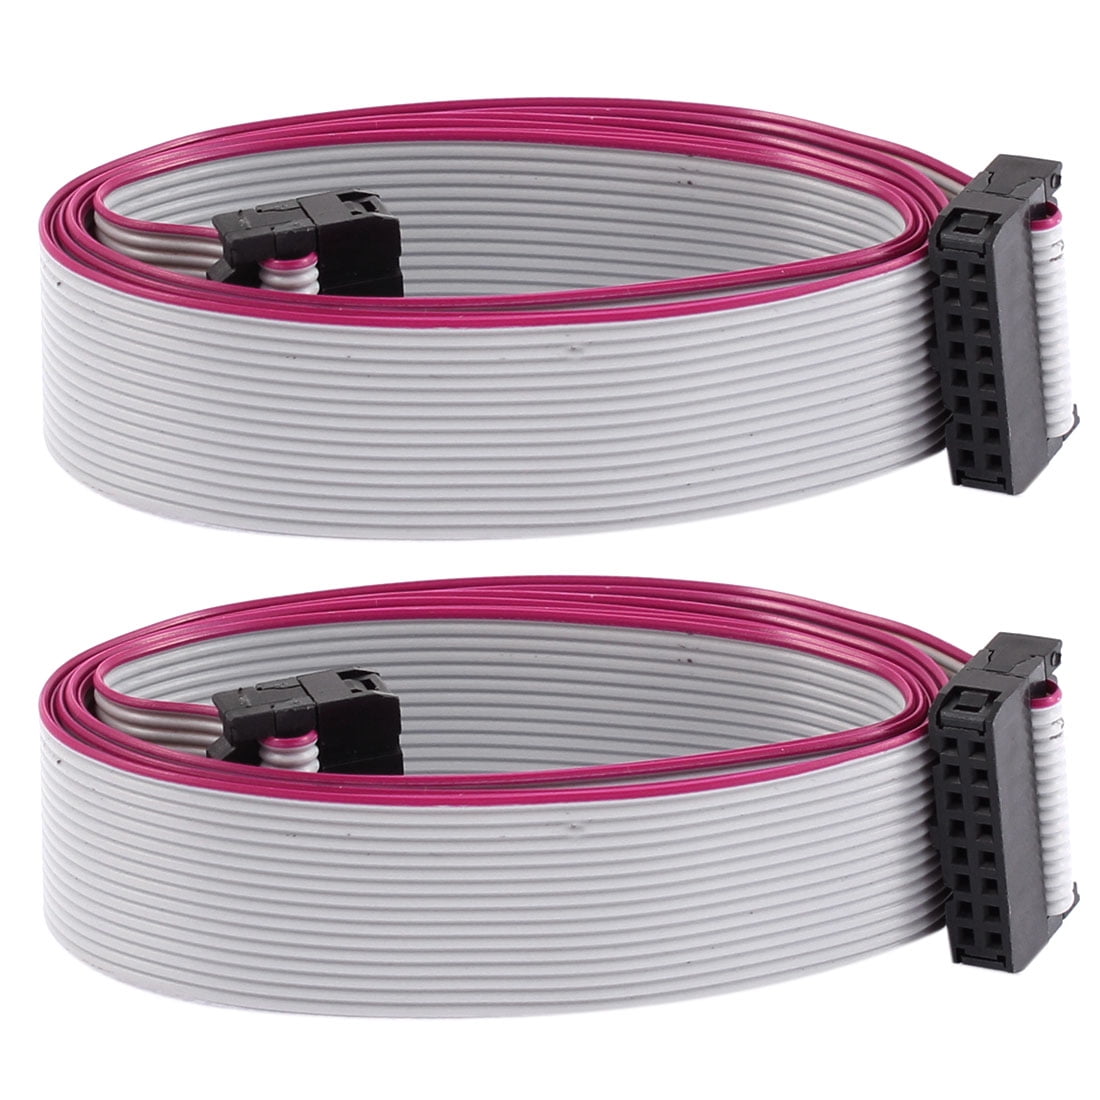 2.54mm Pitch 26 Pin 26 Wire IDC Flat Ribbon Cable Connector 17 inch F/Female. 